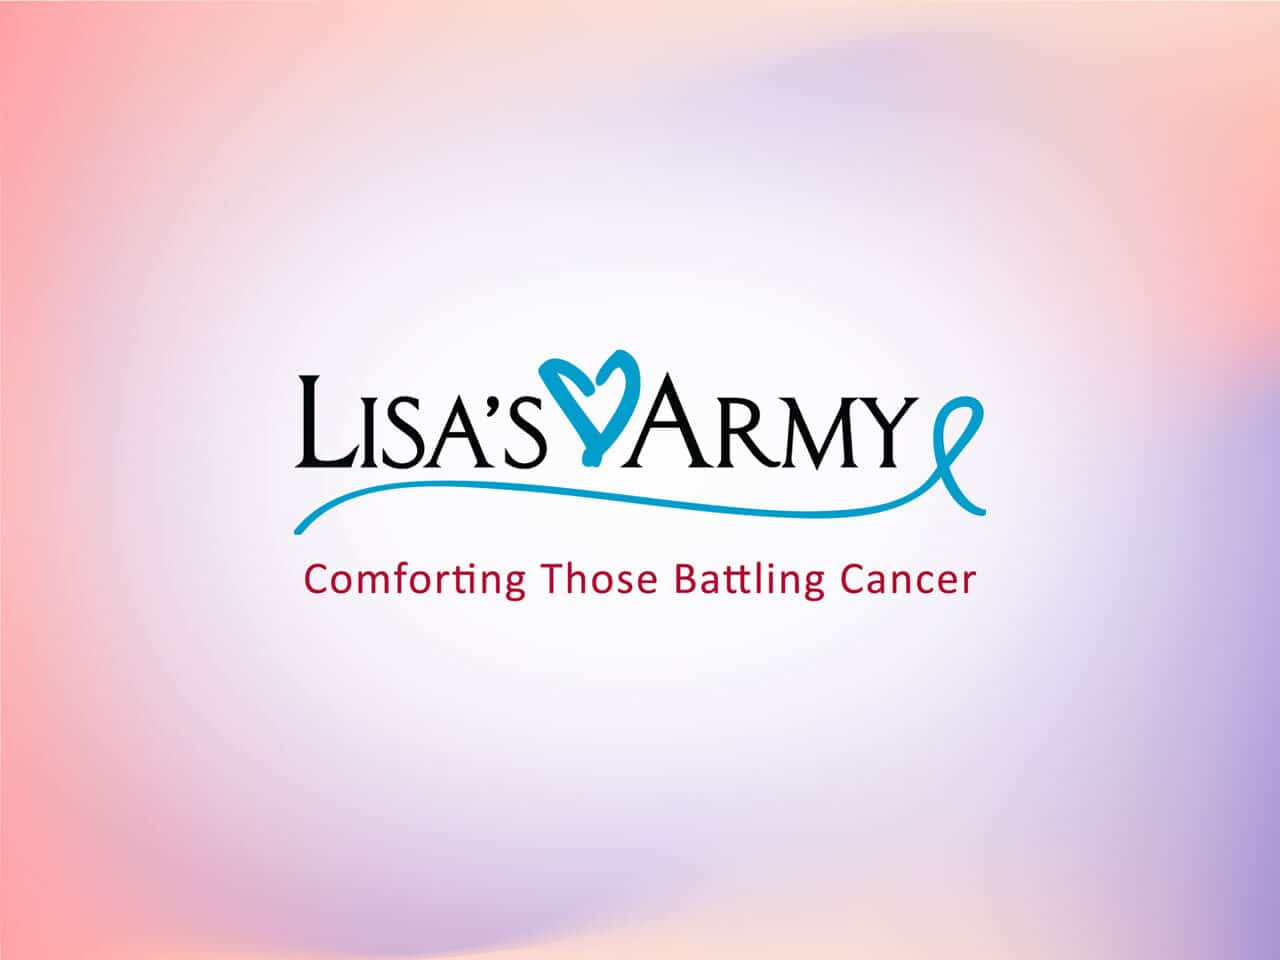 AIROS Hosts Non-Profit Partner Lisa’s Army to Build Care Packages for Patients Battling Cancer